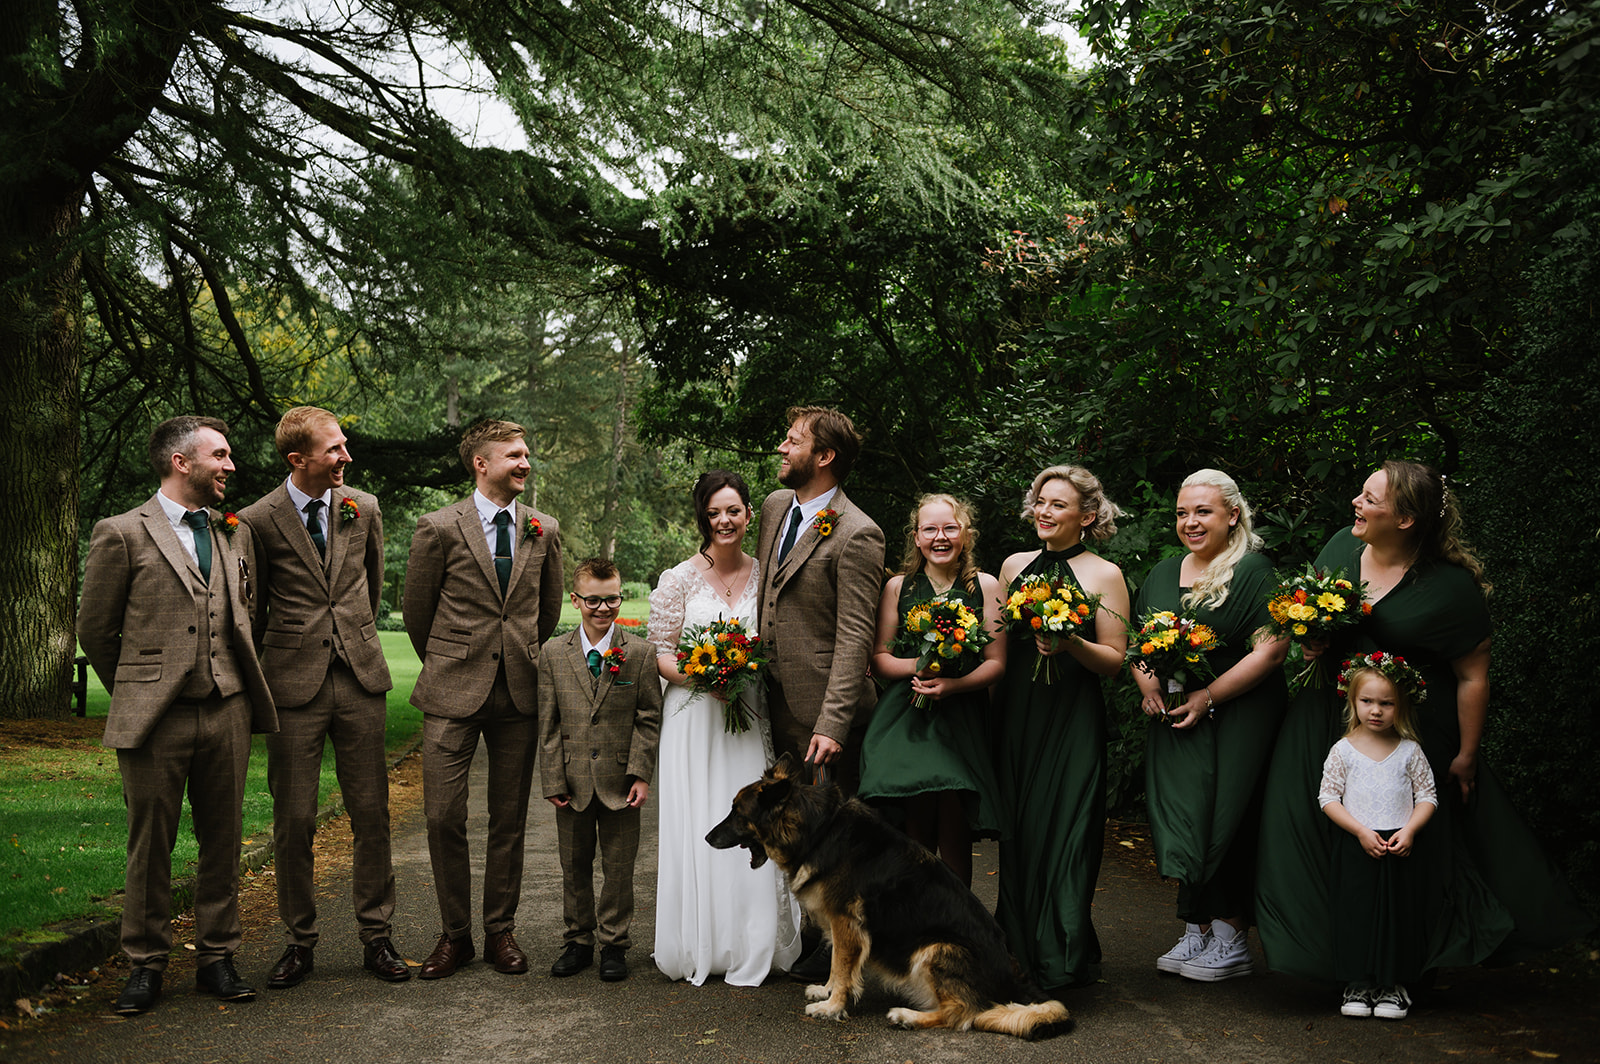 The bridal party at this Whirlowbrook Hall wedding in Sheffield